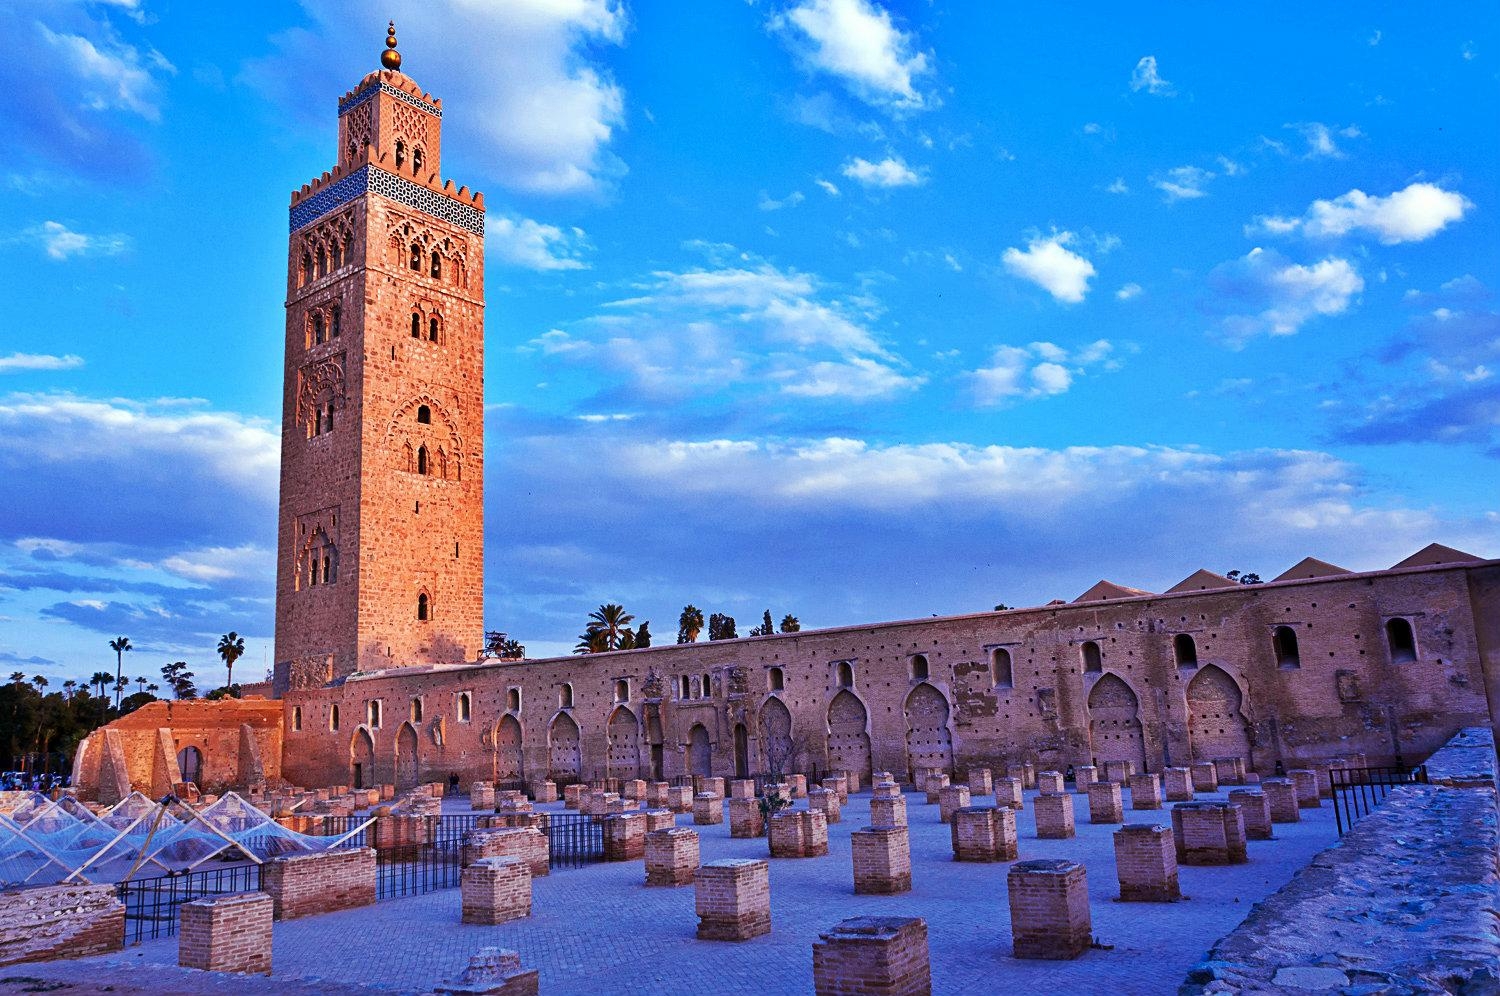 Mosques to do in Marrakech